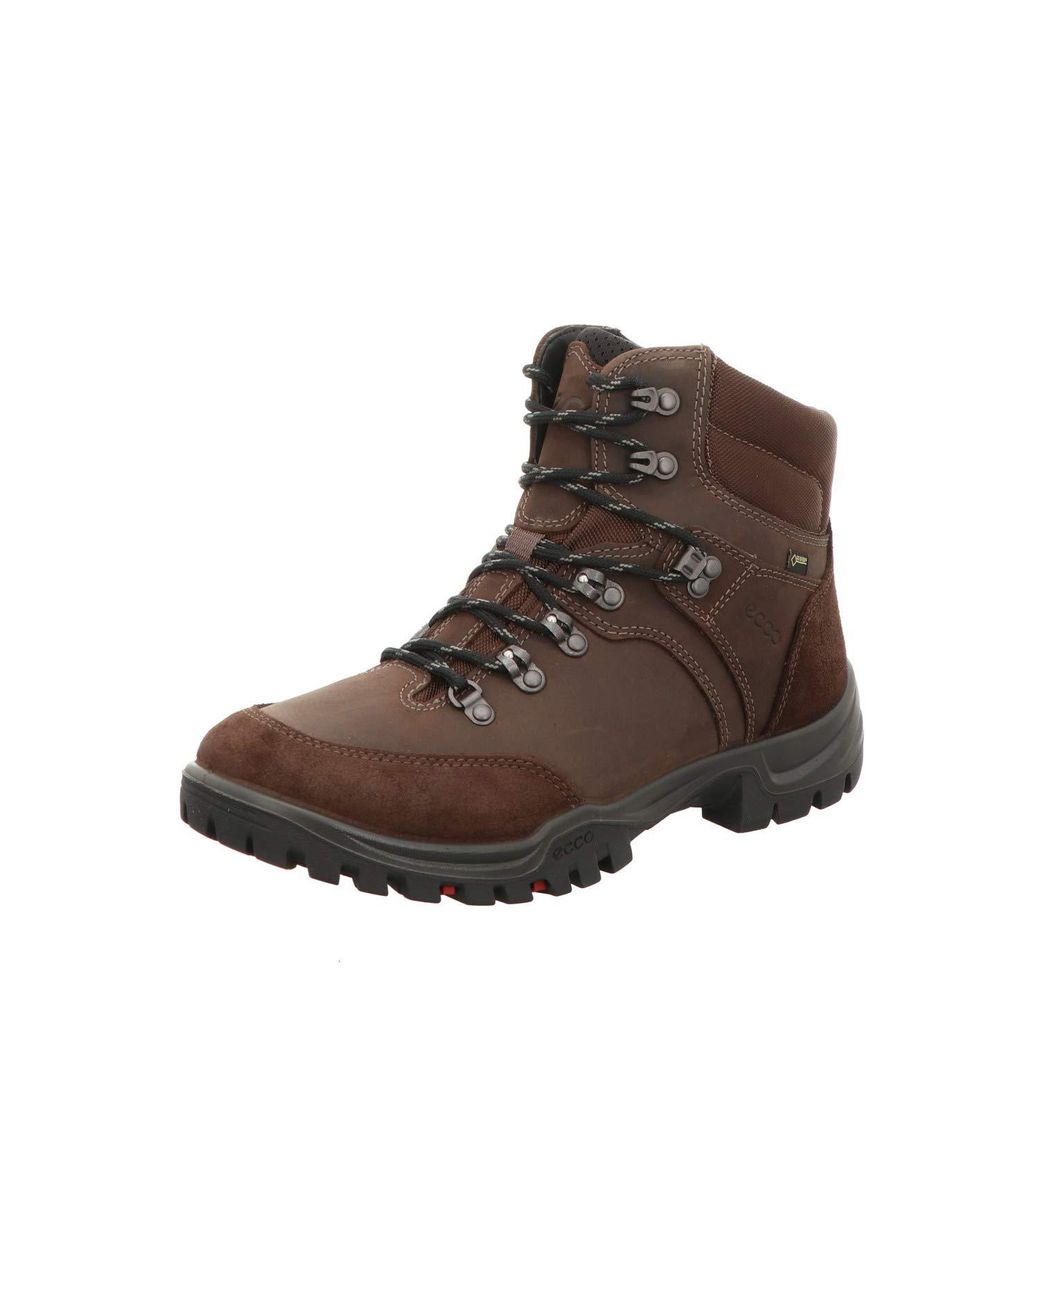 Ecco Leather Xpedition Iii Low Rise Hiking Shoes in Coffee (Brown) for Men  - Save 40% - Lyst